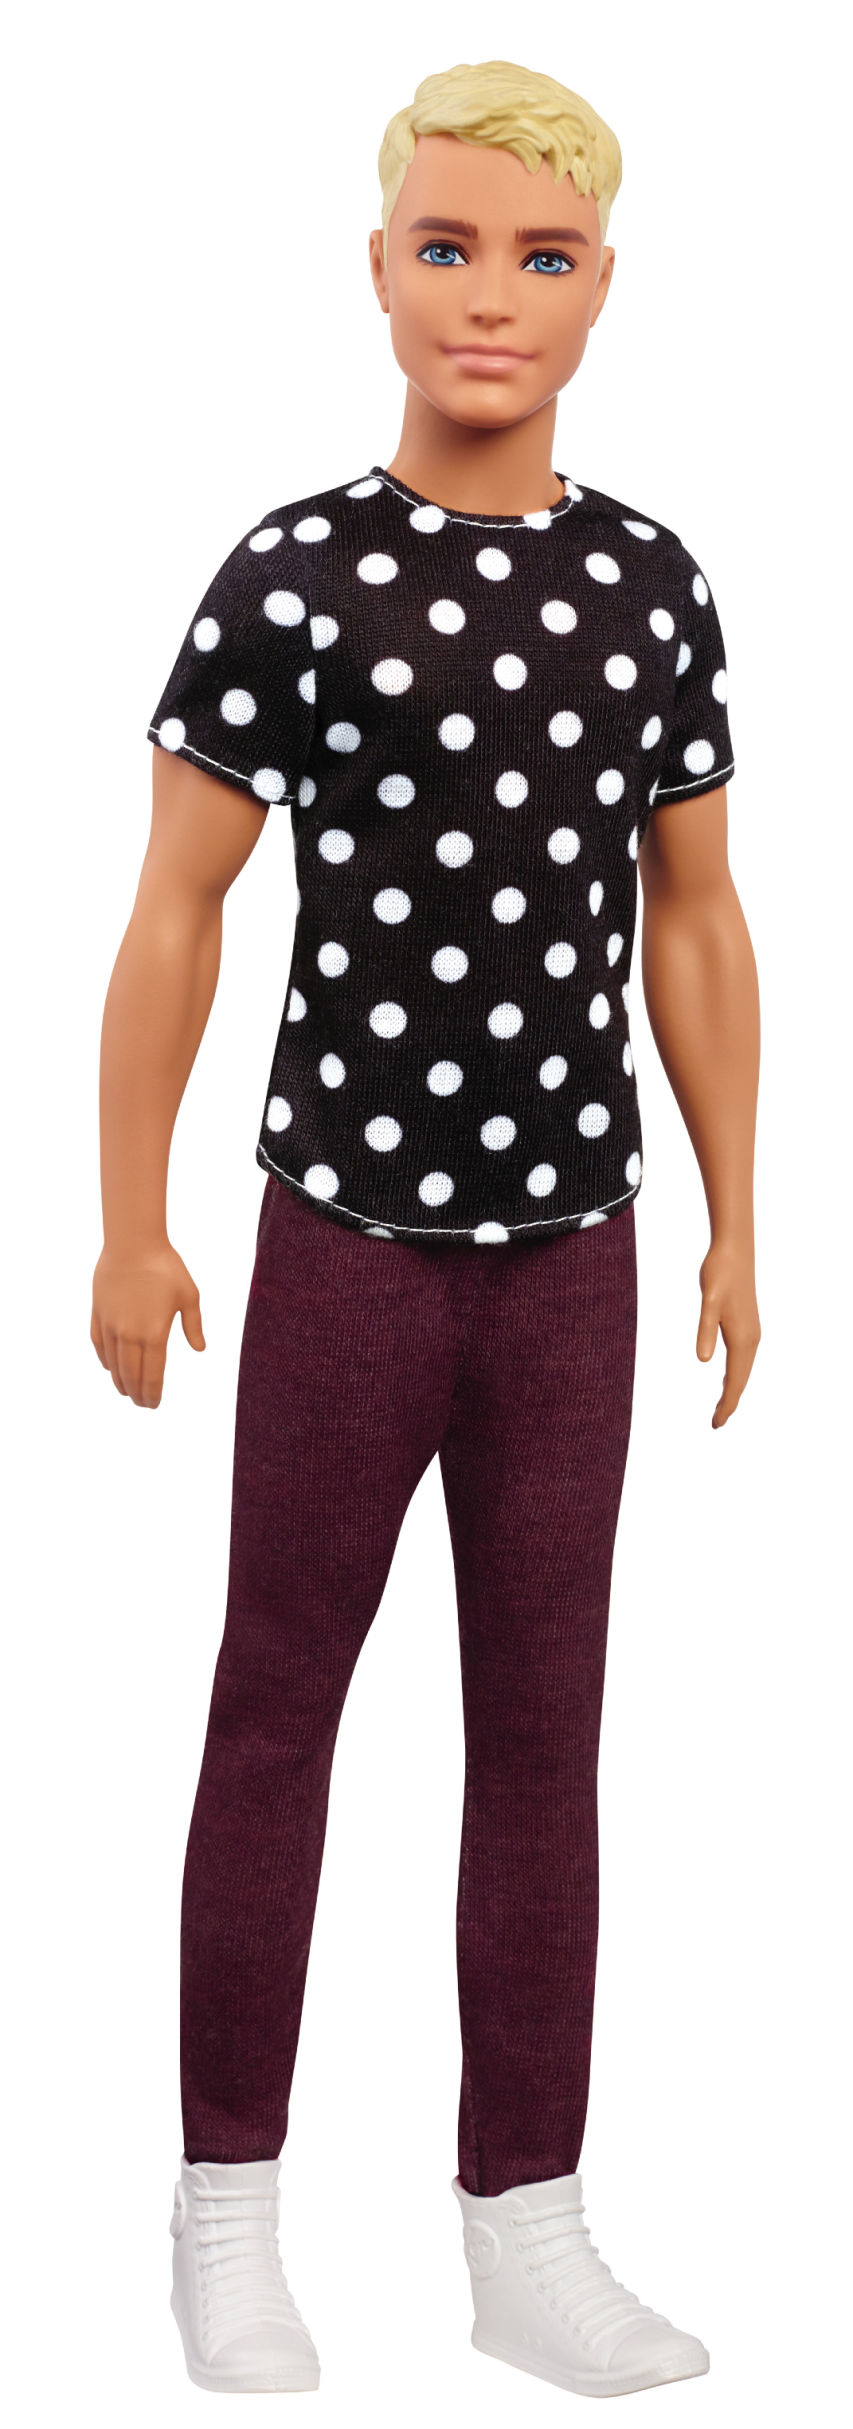 Cornrows, man buns and a variety of skin tones: The Ken doll is getting ...